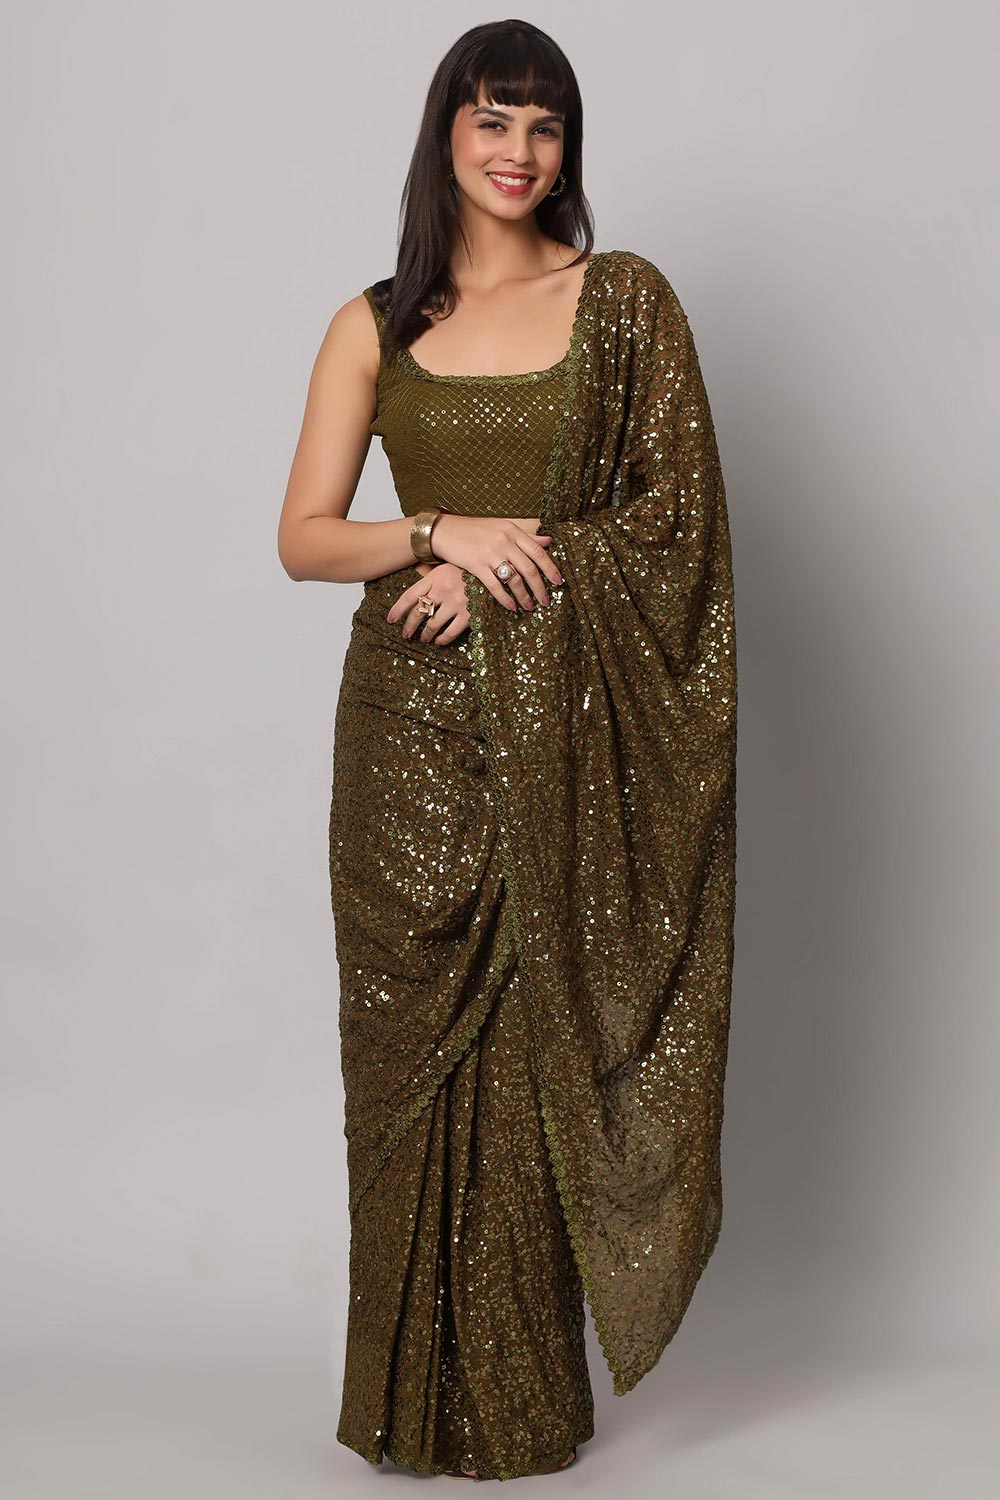 Buy Mehandi Sequins Embroidery Faux Georgette One Minute Saree Online - One Minute Saree